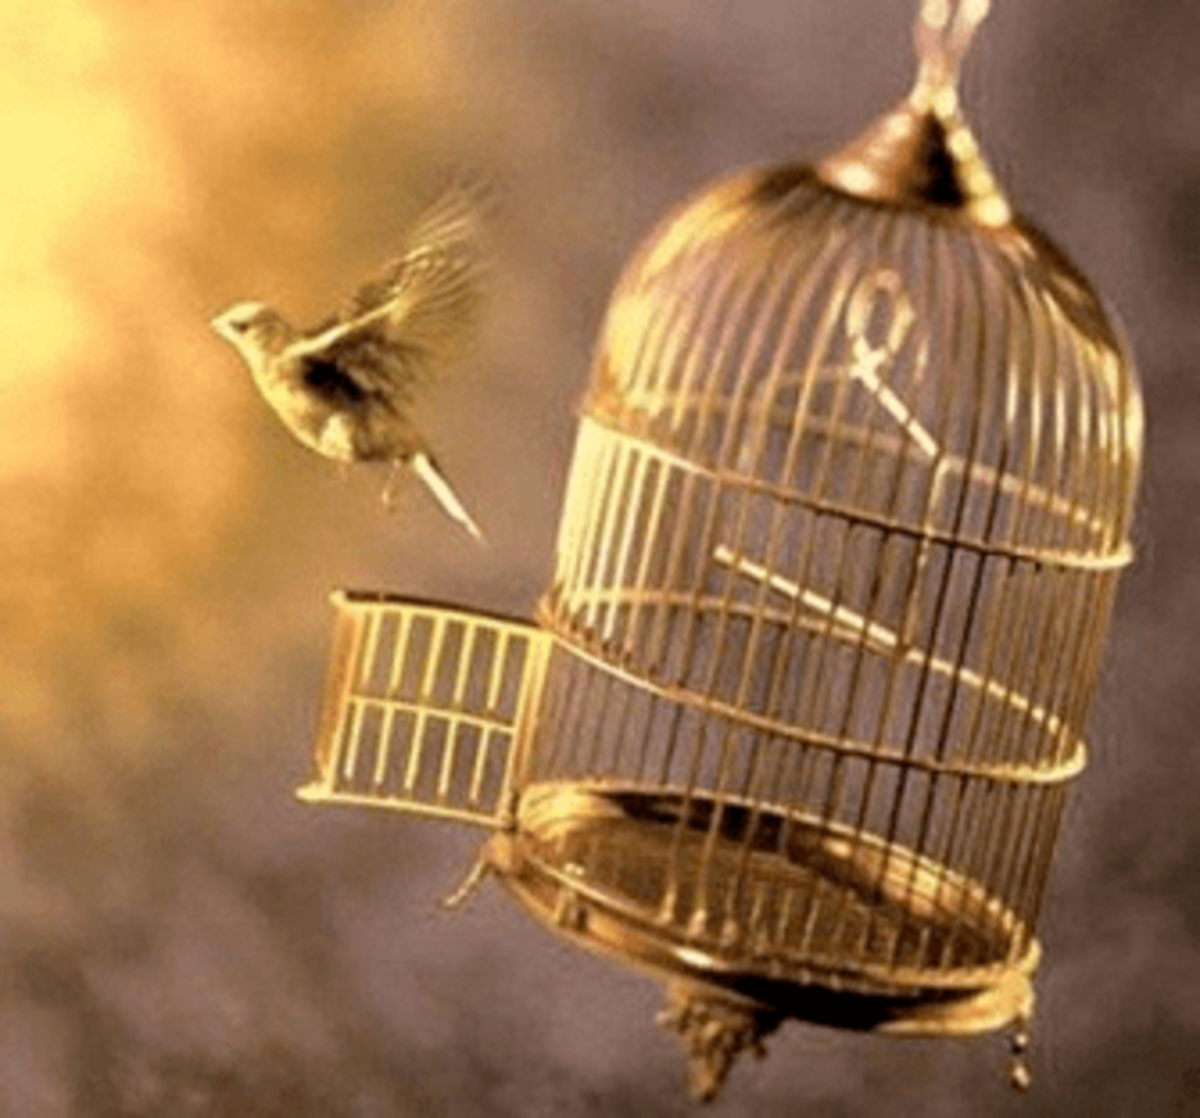 how-wonderful-it-will-be-to-set-a-caged-bird-free